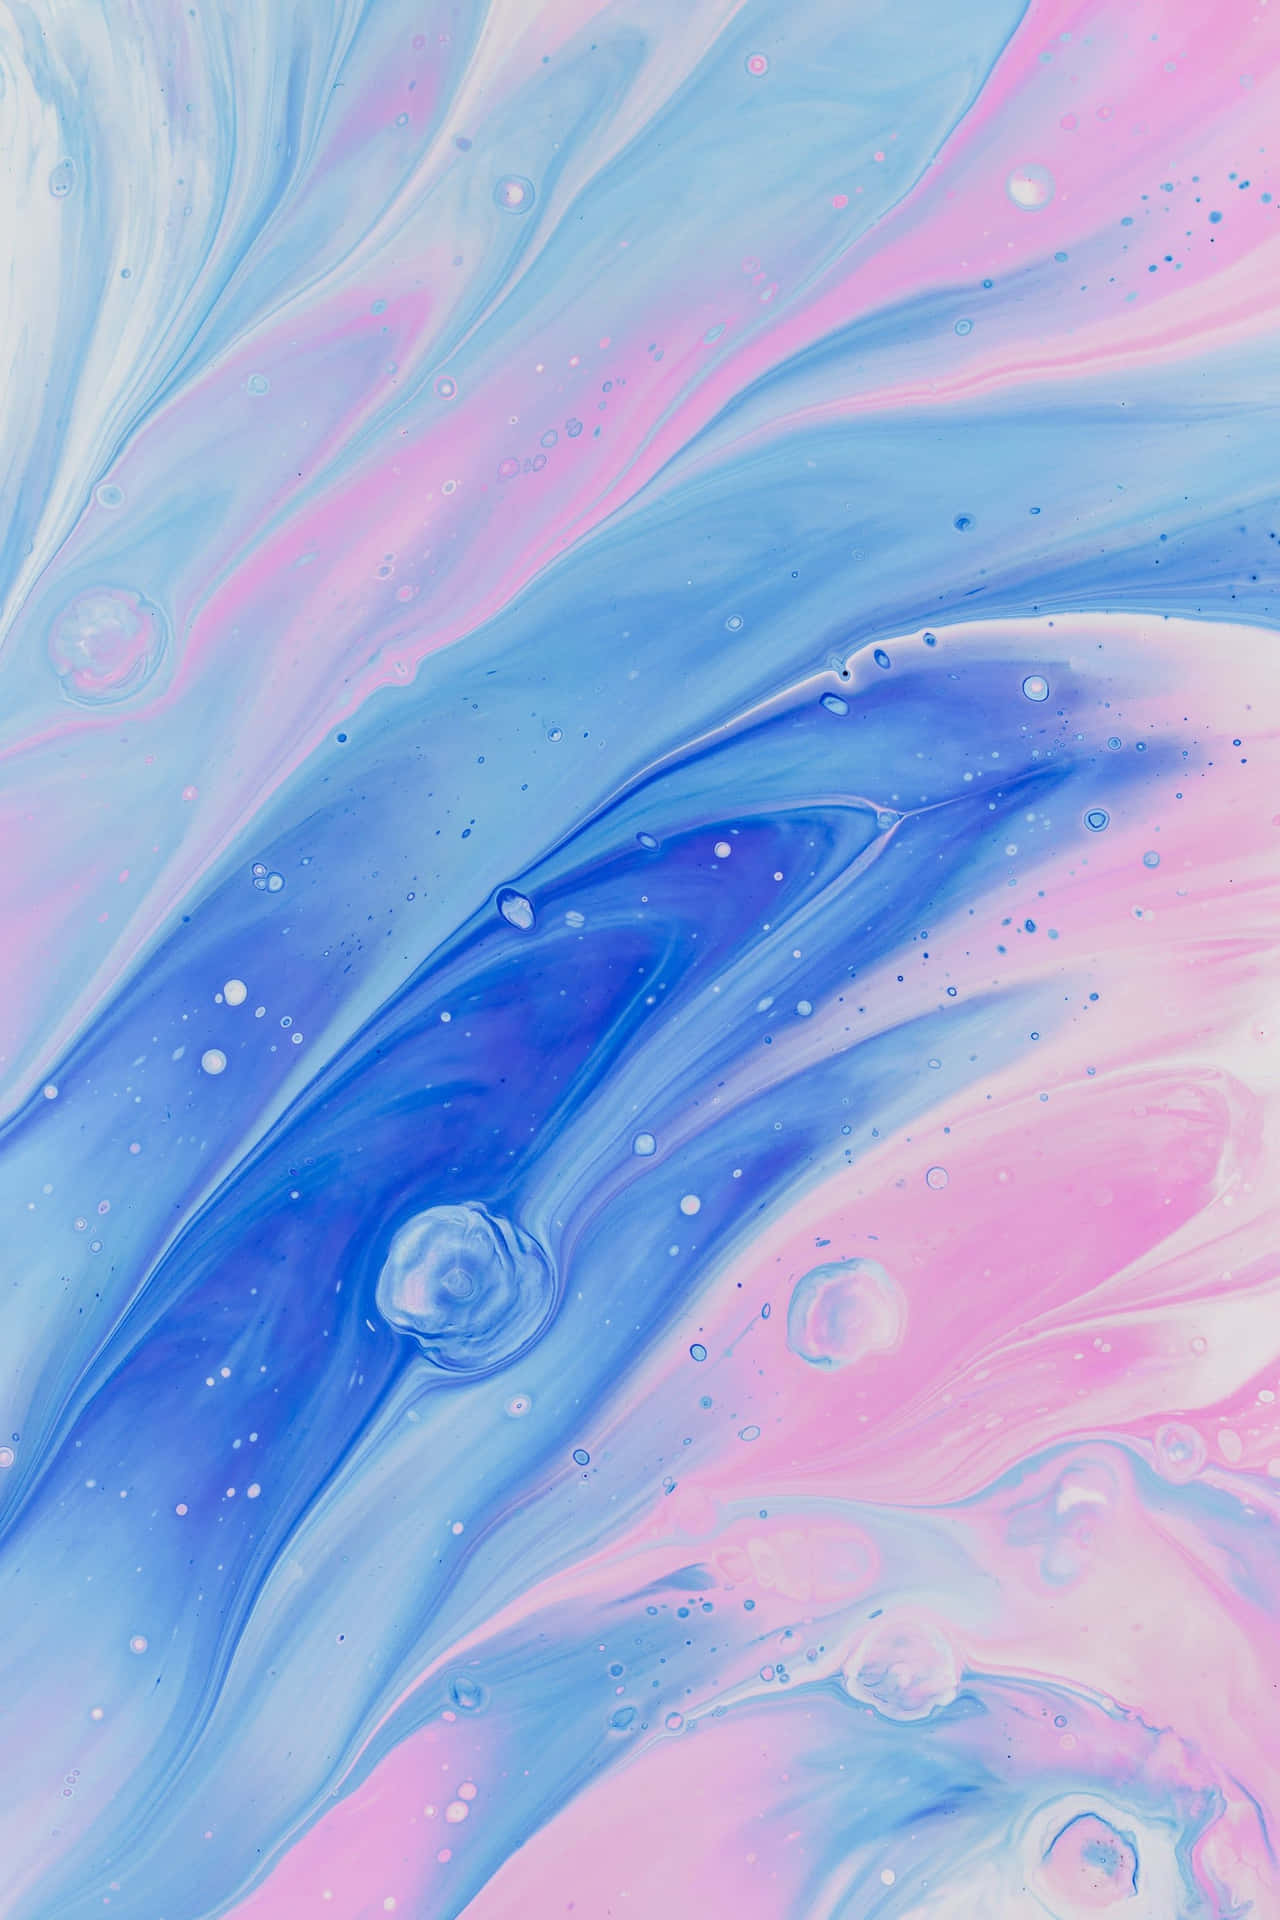 A Blue And Pink Swirling Liquid Wallpaper